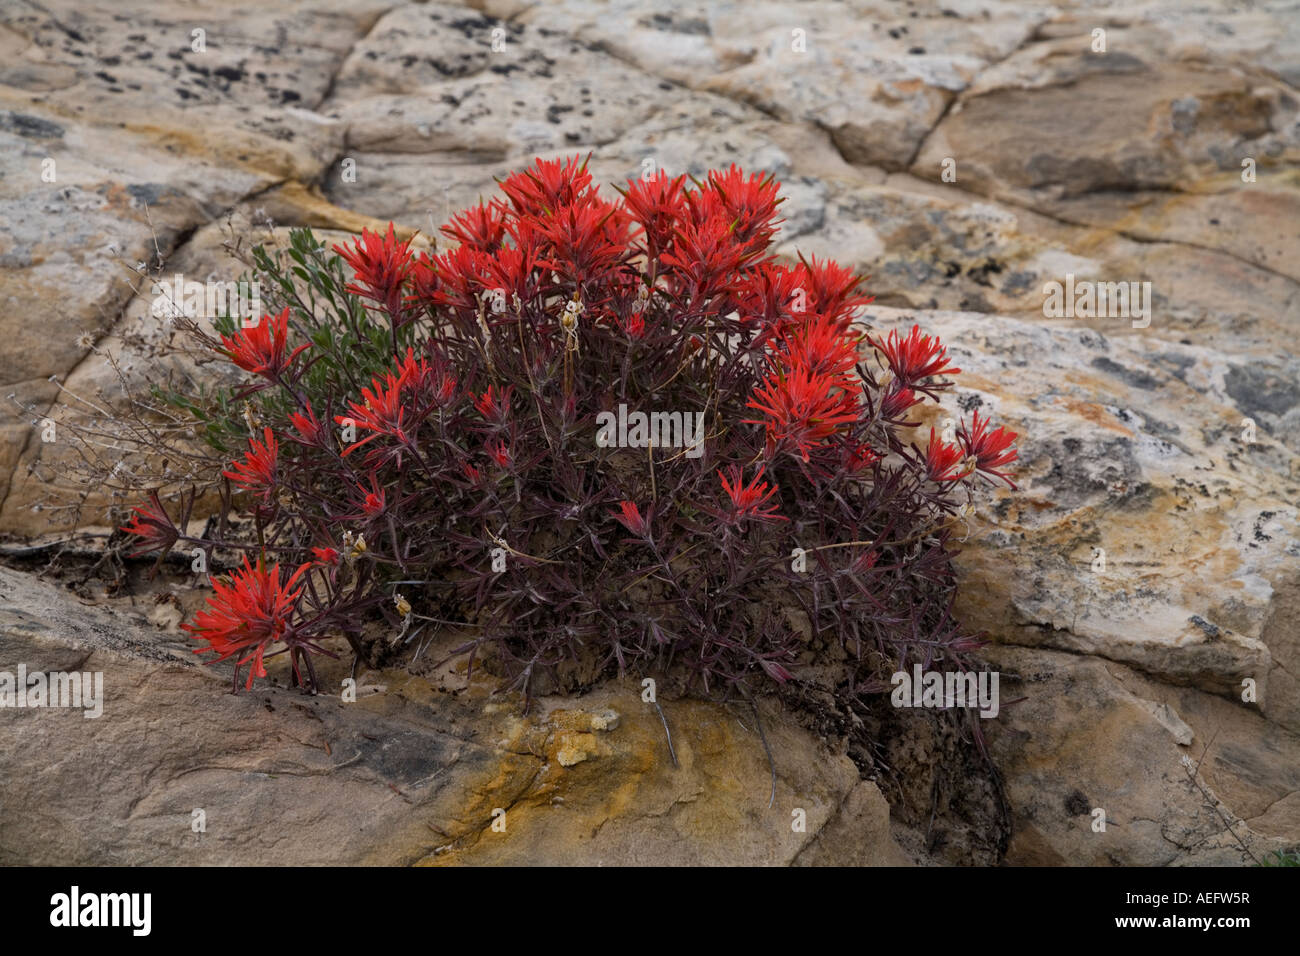 Red flowers growing out of sandstone rock in southern Utah Stock Photo